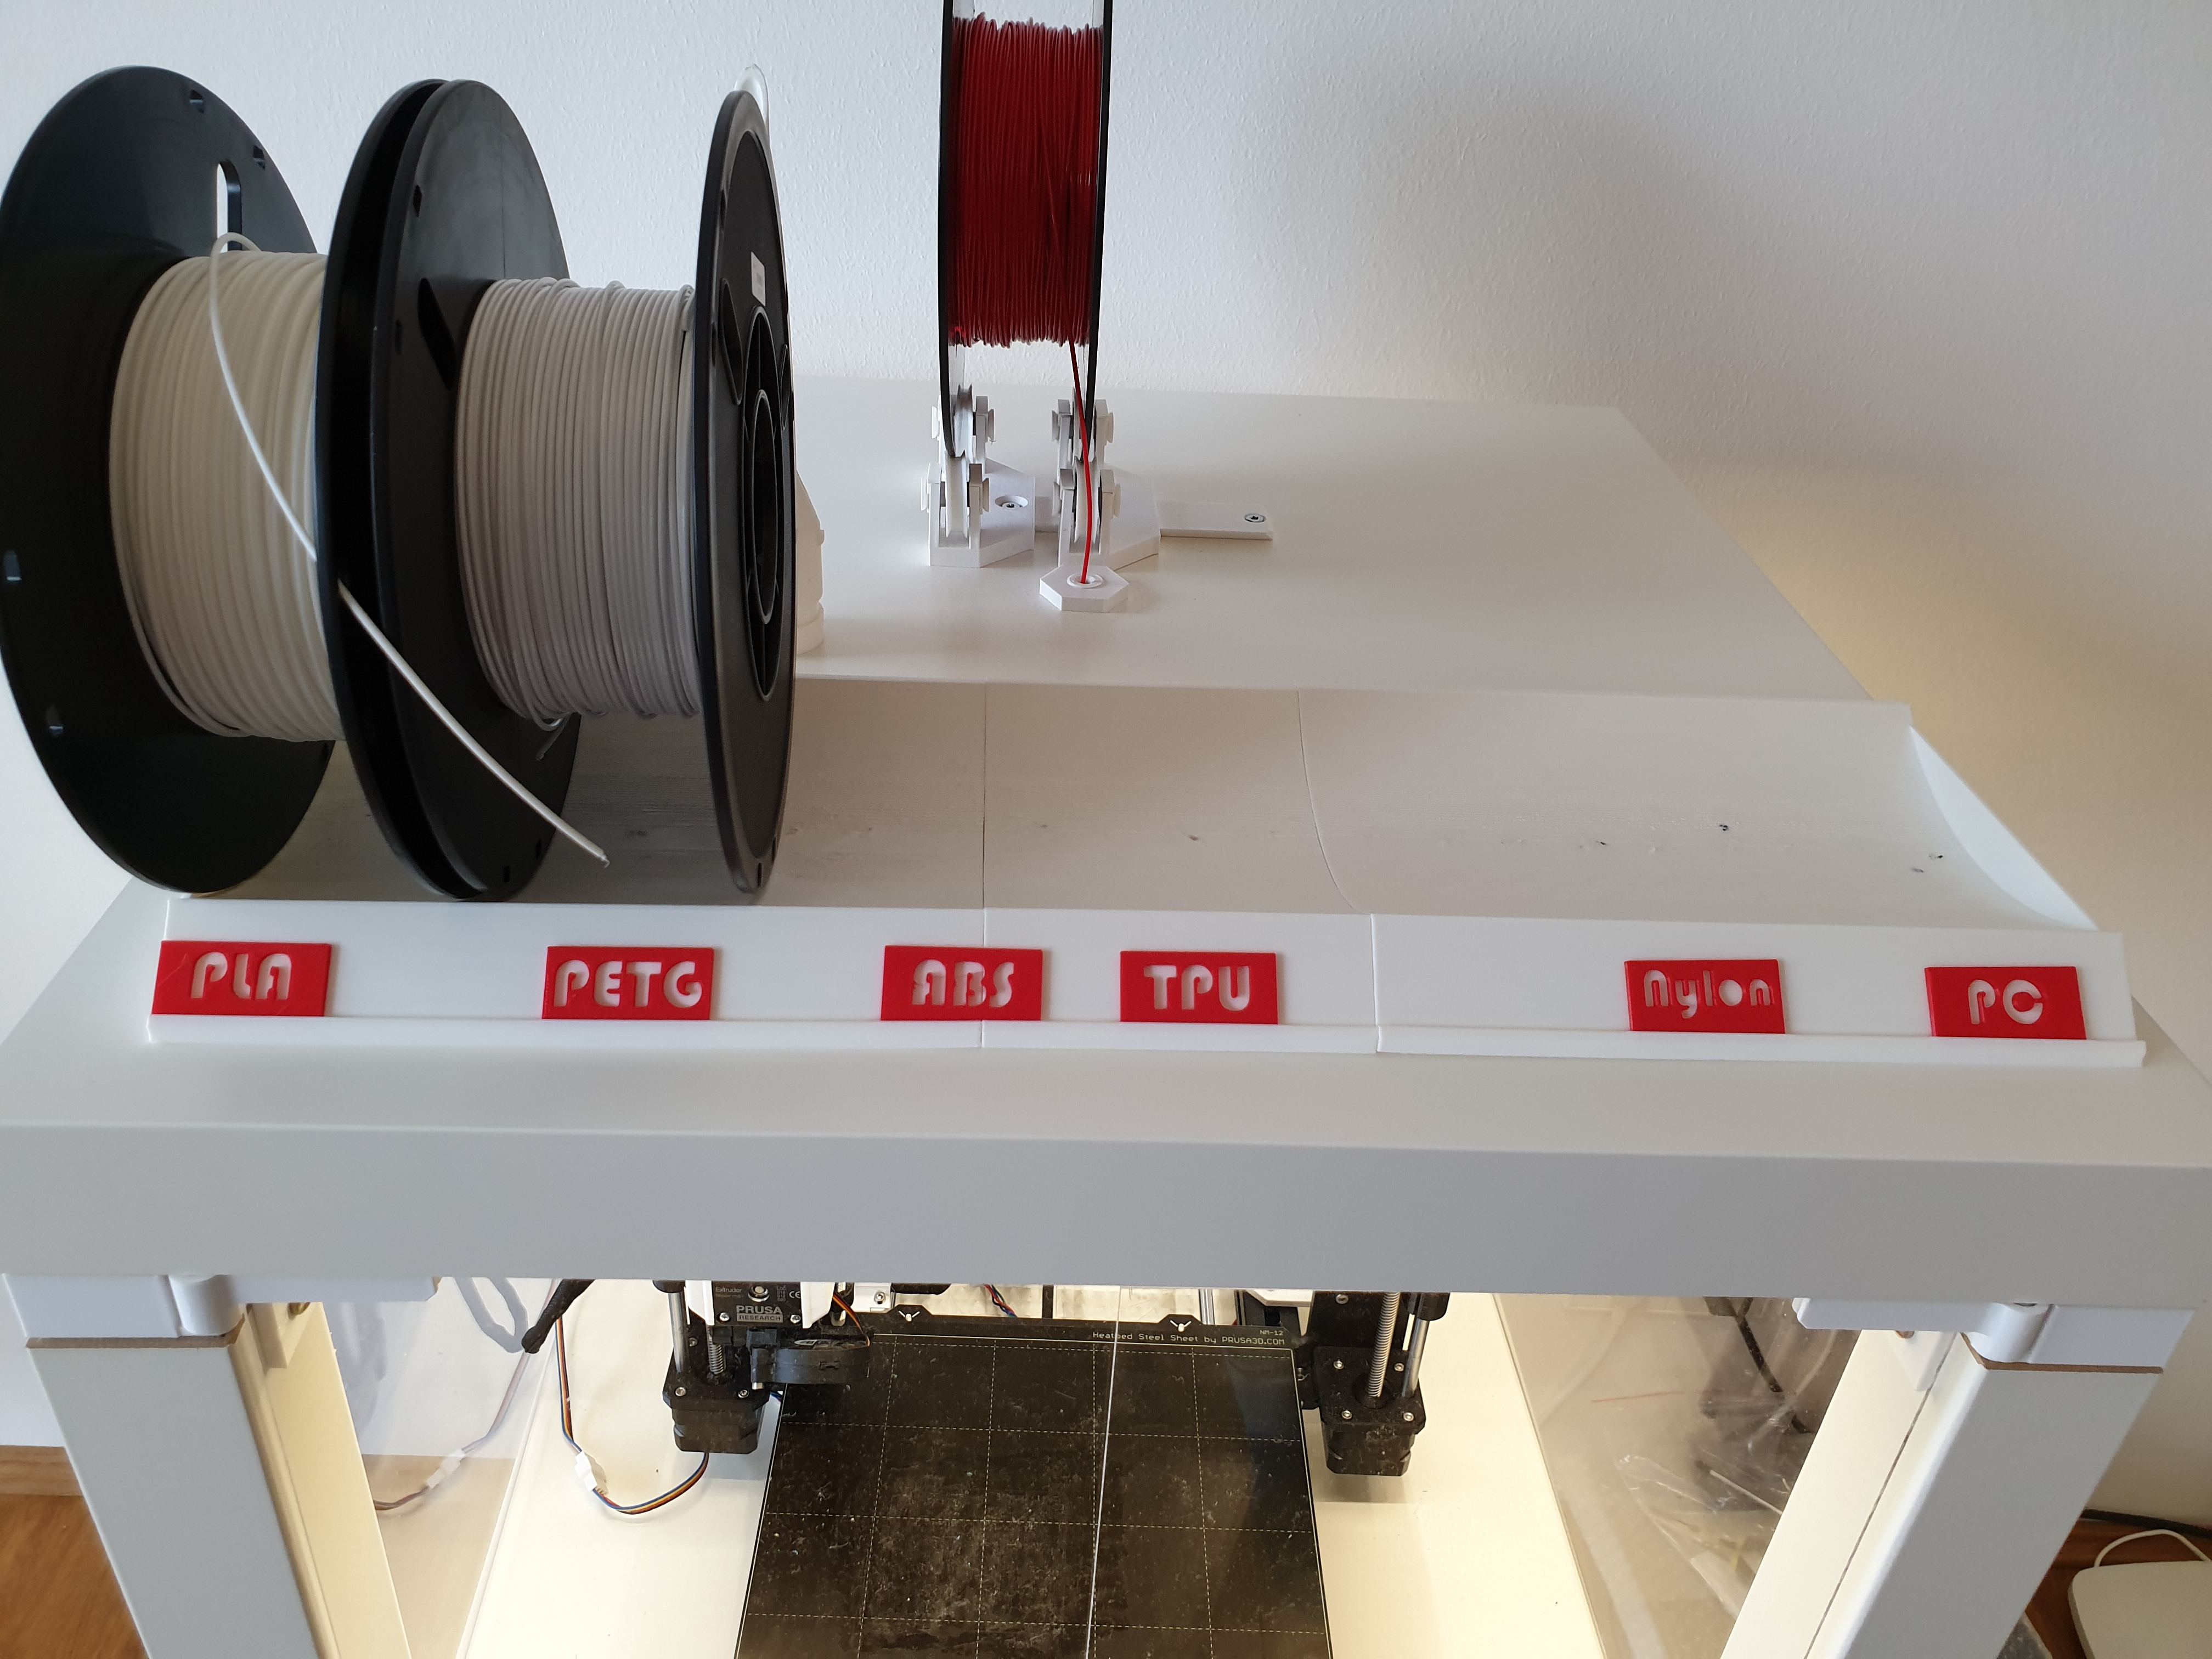 Endless Spool holder Rack stand for shelfes or closets, fits perfect into USM